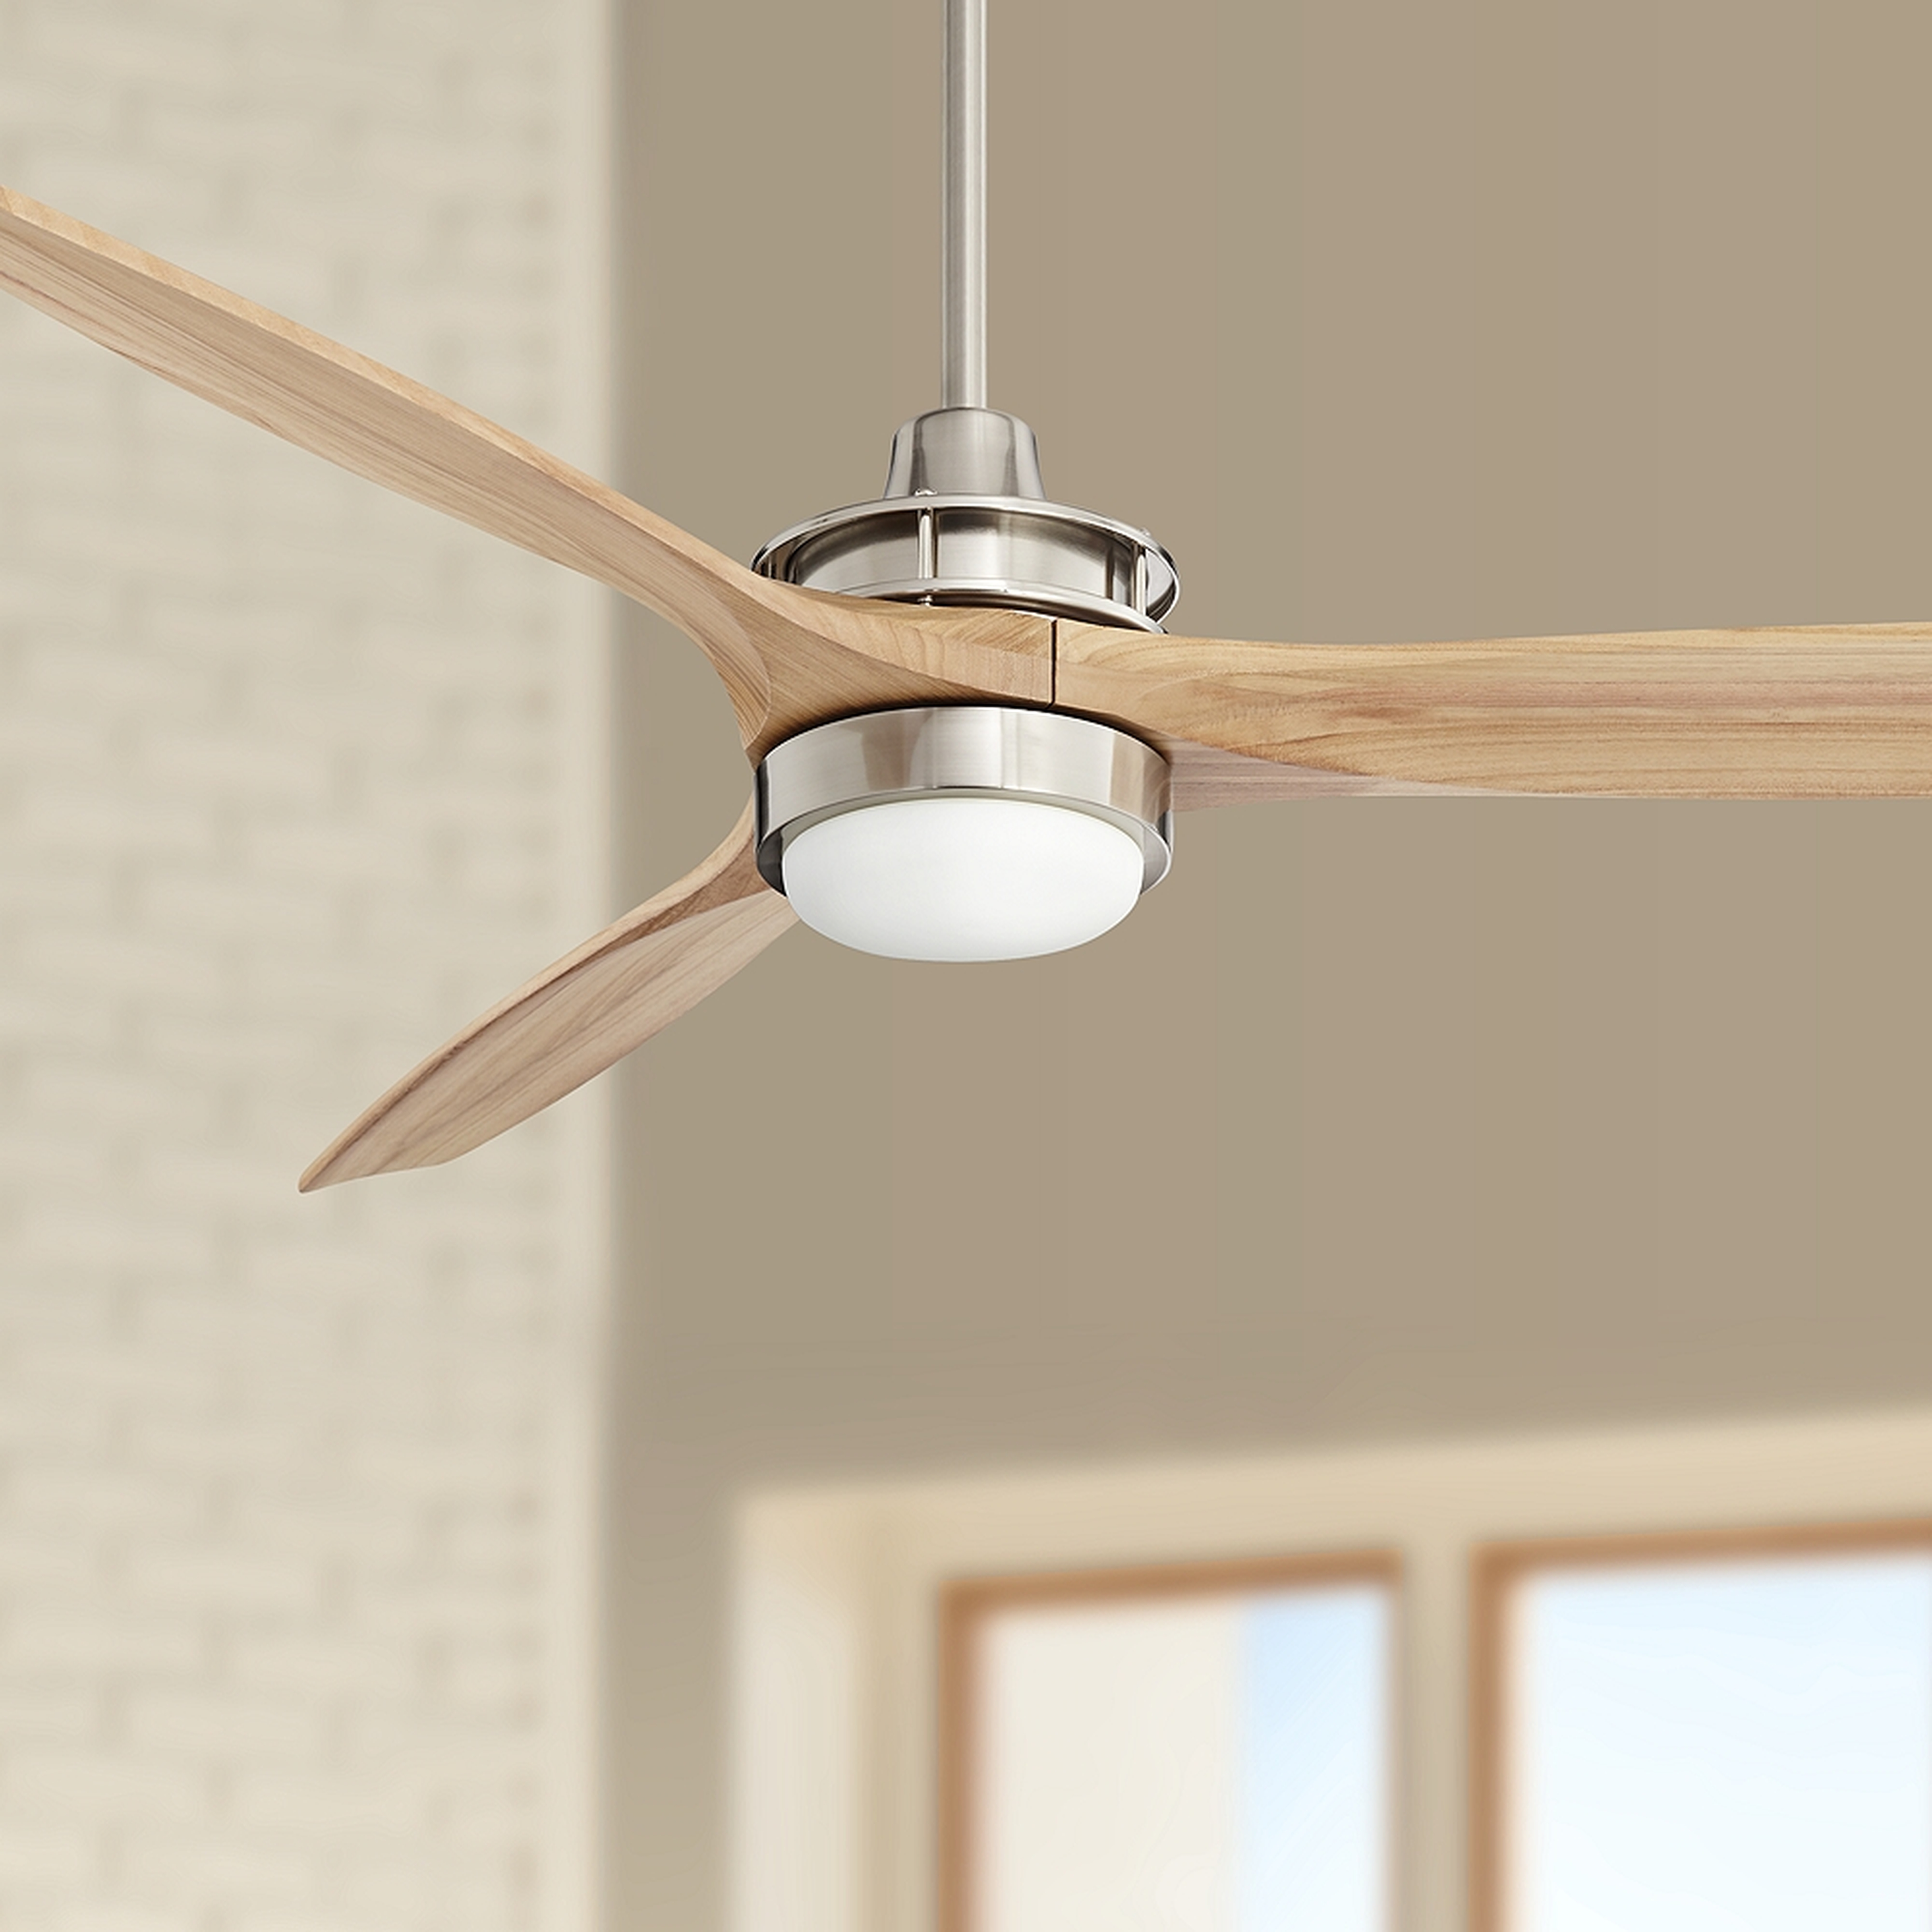 52" Windspun Brushed Nickel and Natural Wood LED Ceiling Fan - Style # 57J95 - Lamps Plus